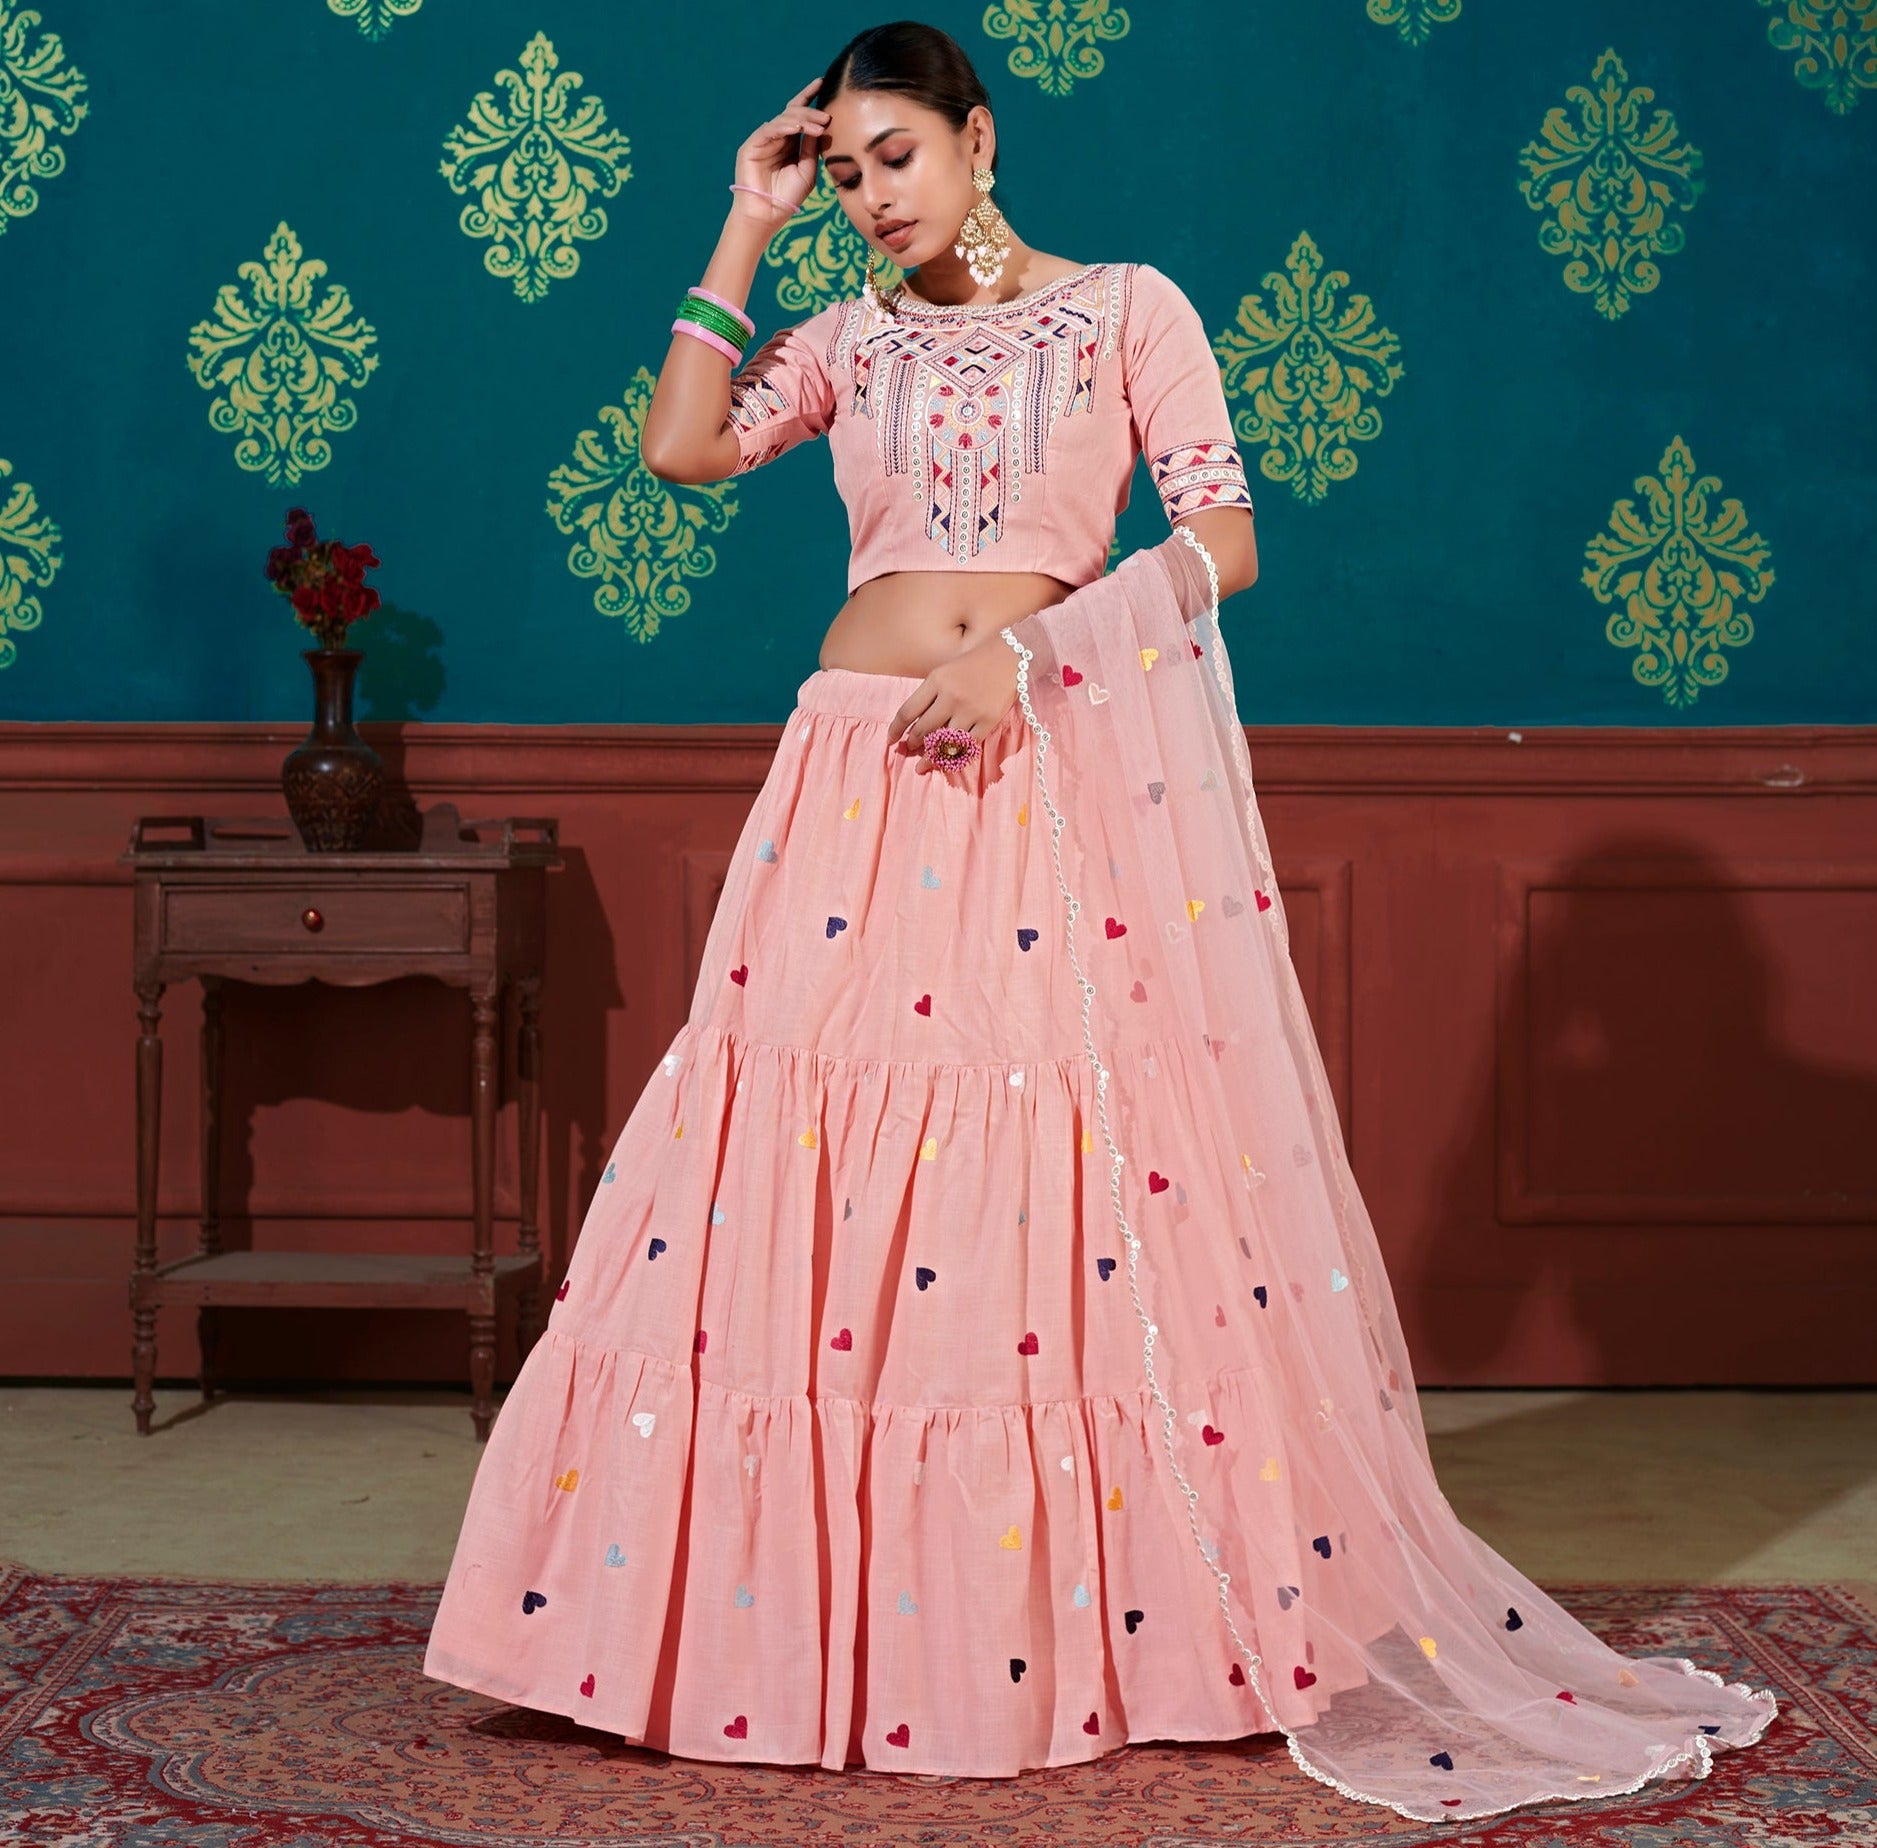 Top Bridal Lehenga Designers You Should Know About | Zardozi Pune - Silk |  Traditional | Bridal | Dresses | Gowns and More